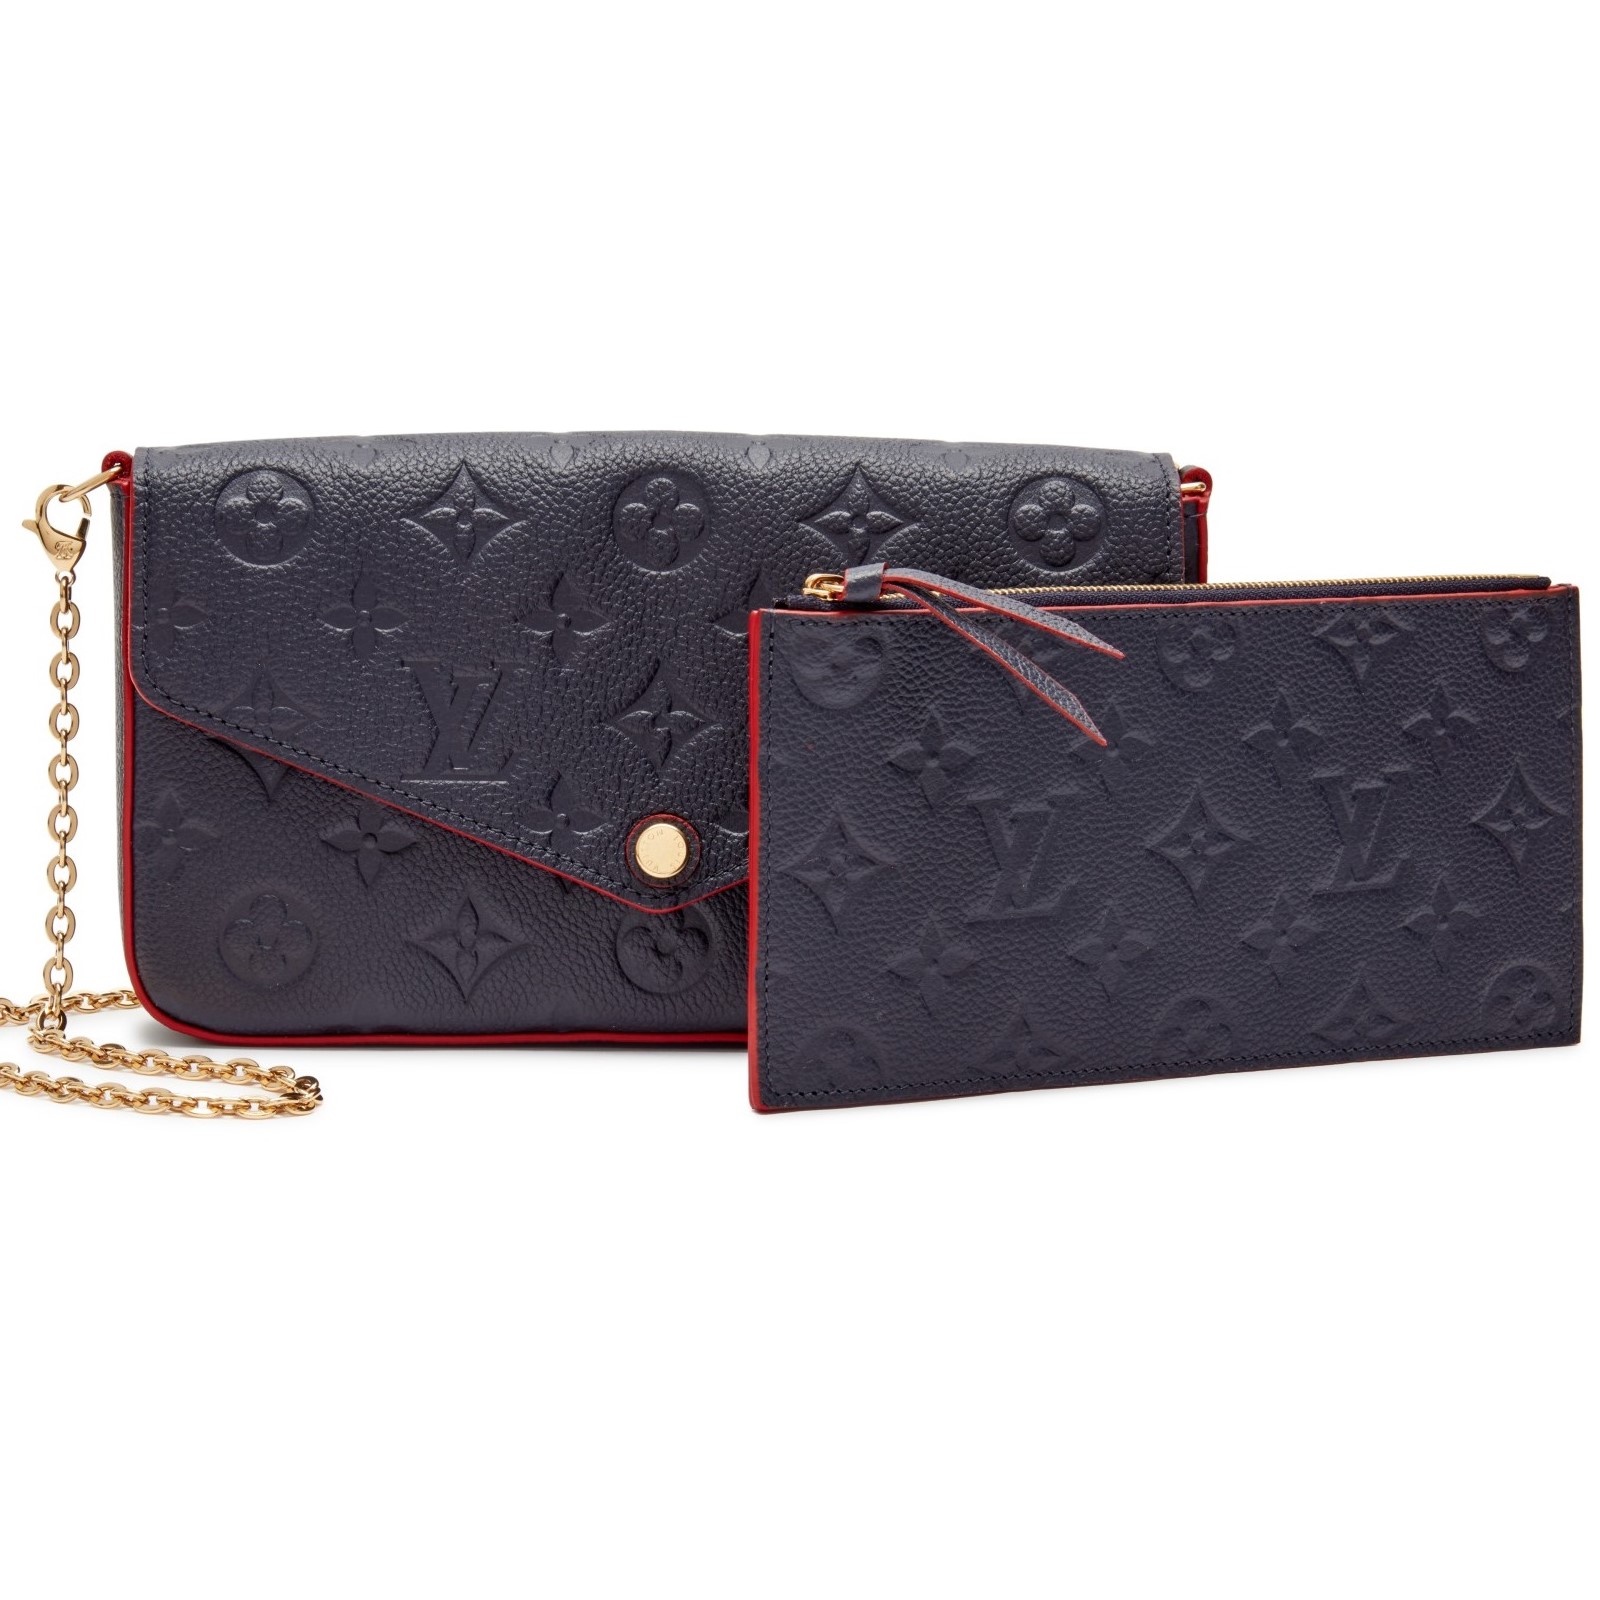 TÚI ĐEO CHÉO NỮ LV LOUIS VUITTON FÉLICIE POCHETTE MARINE ROUGE MONOGRAM EMPREINTE LEATHER WALLETS AND SMALL LEATHER GOODS M64099 1